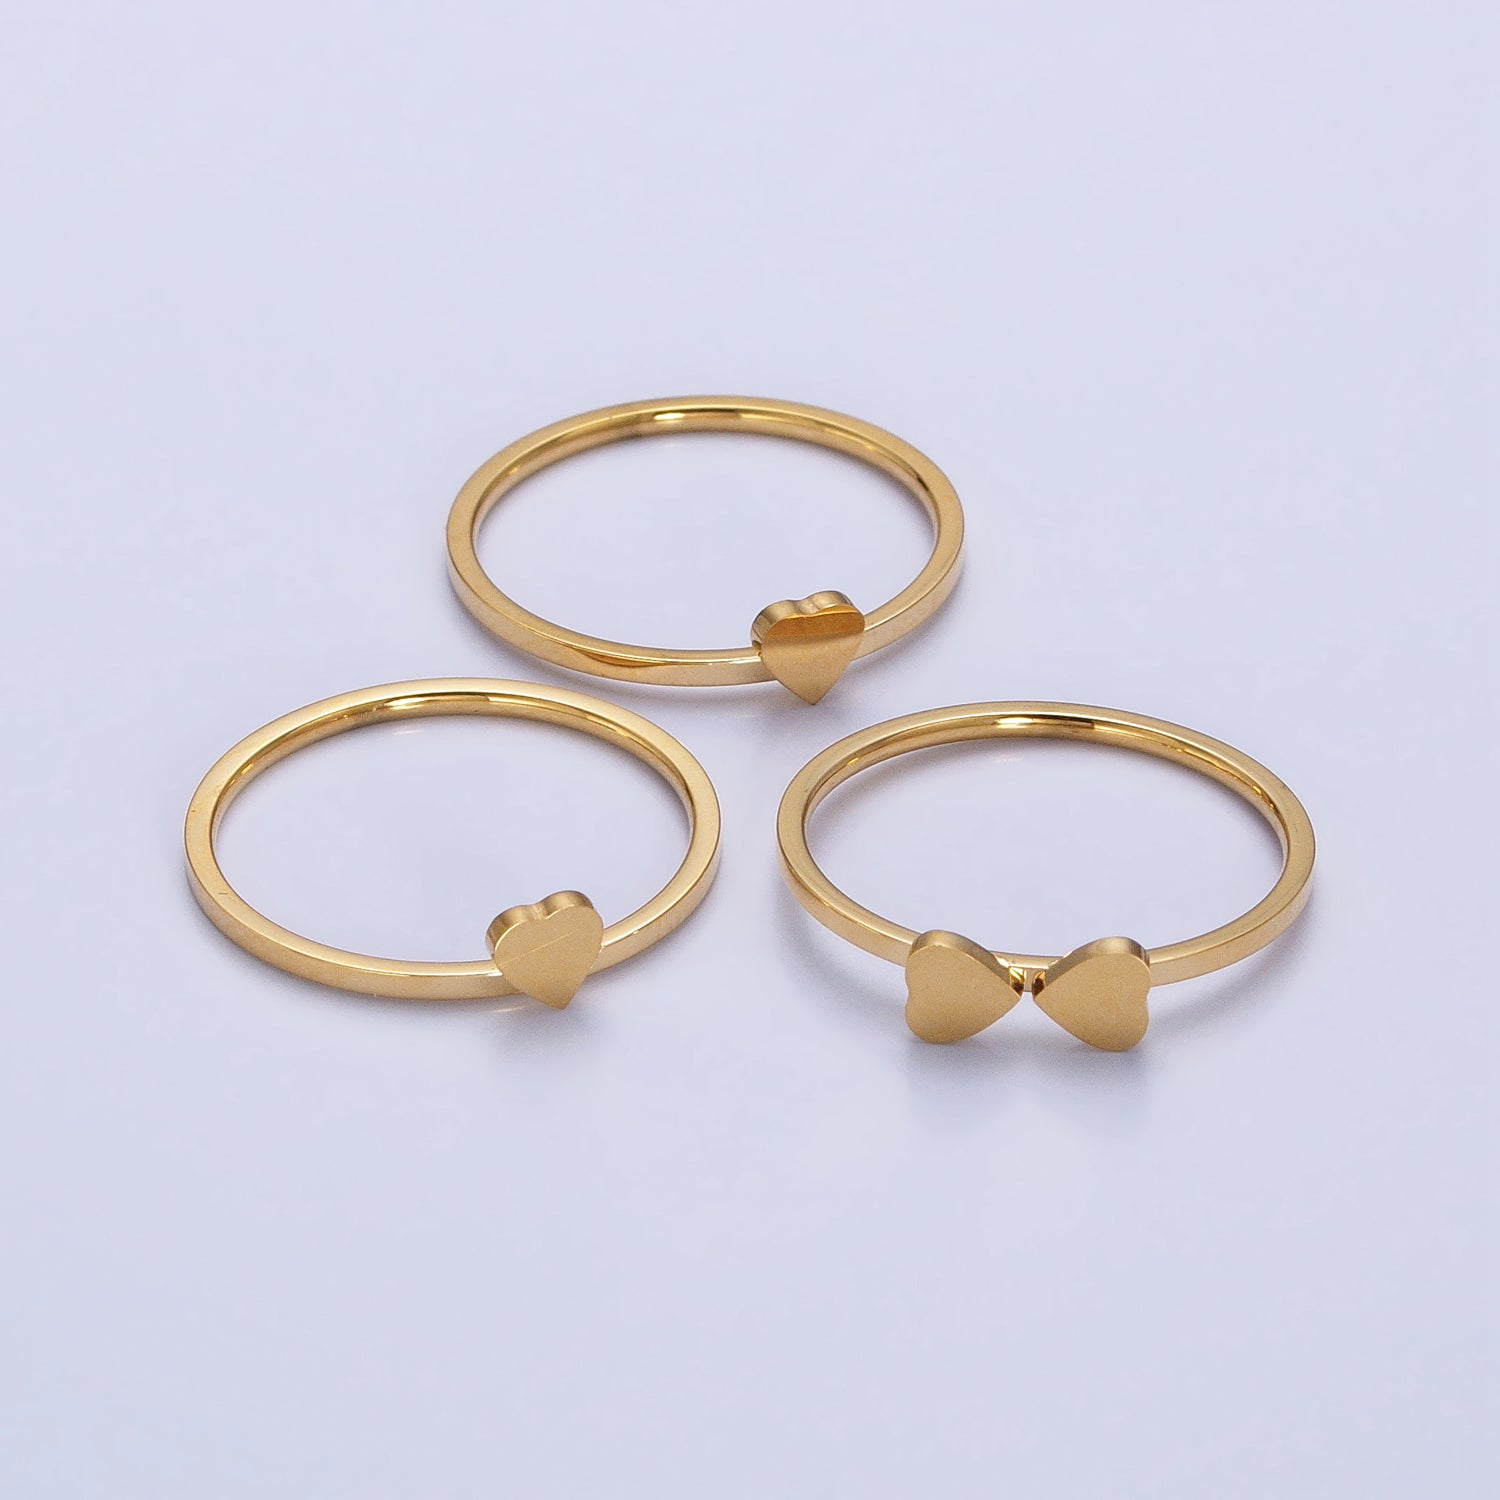 Stainless Steel Triple Heart Clover Quatrefoil Band Ring Set in Gold & Silver | AA1549, AA1556 - DLUXCA